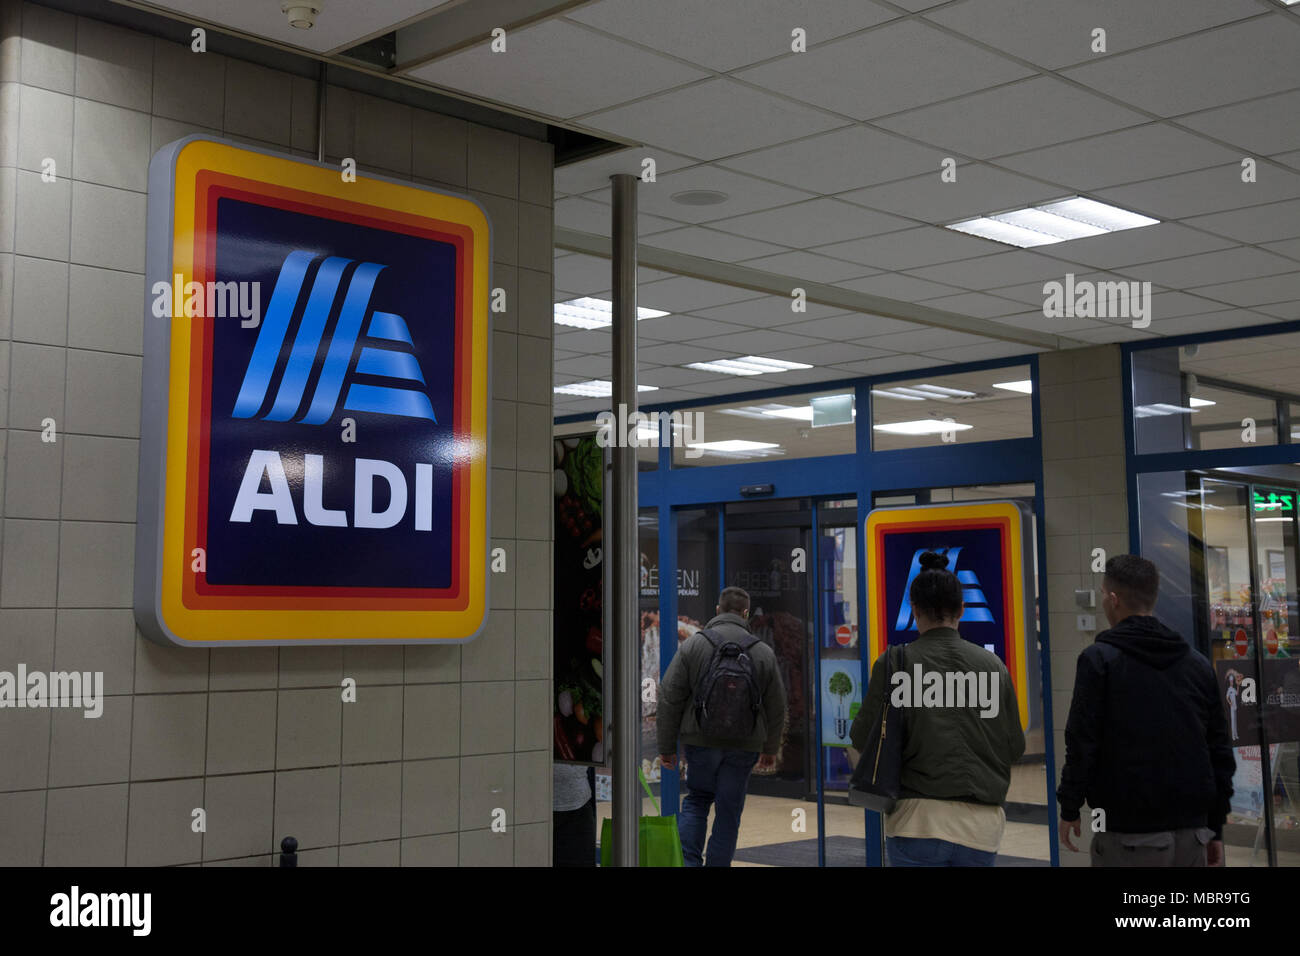 BUDAPEST, HUNGARY - APRIL 7, 2018: Aldi logo on one of their shops for Hungary. Aldi is a German Discount Supermarket chain developped worldwide  Pict Stock Photo